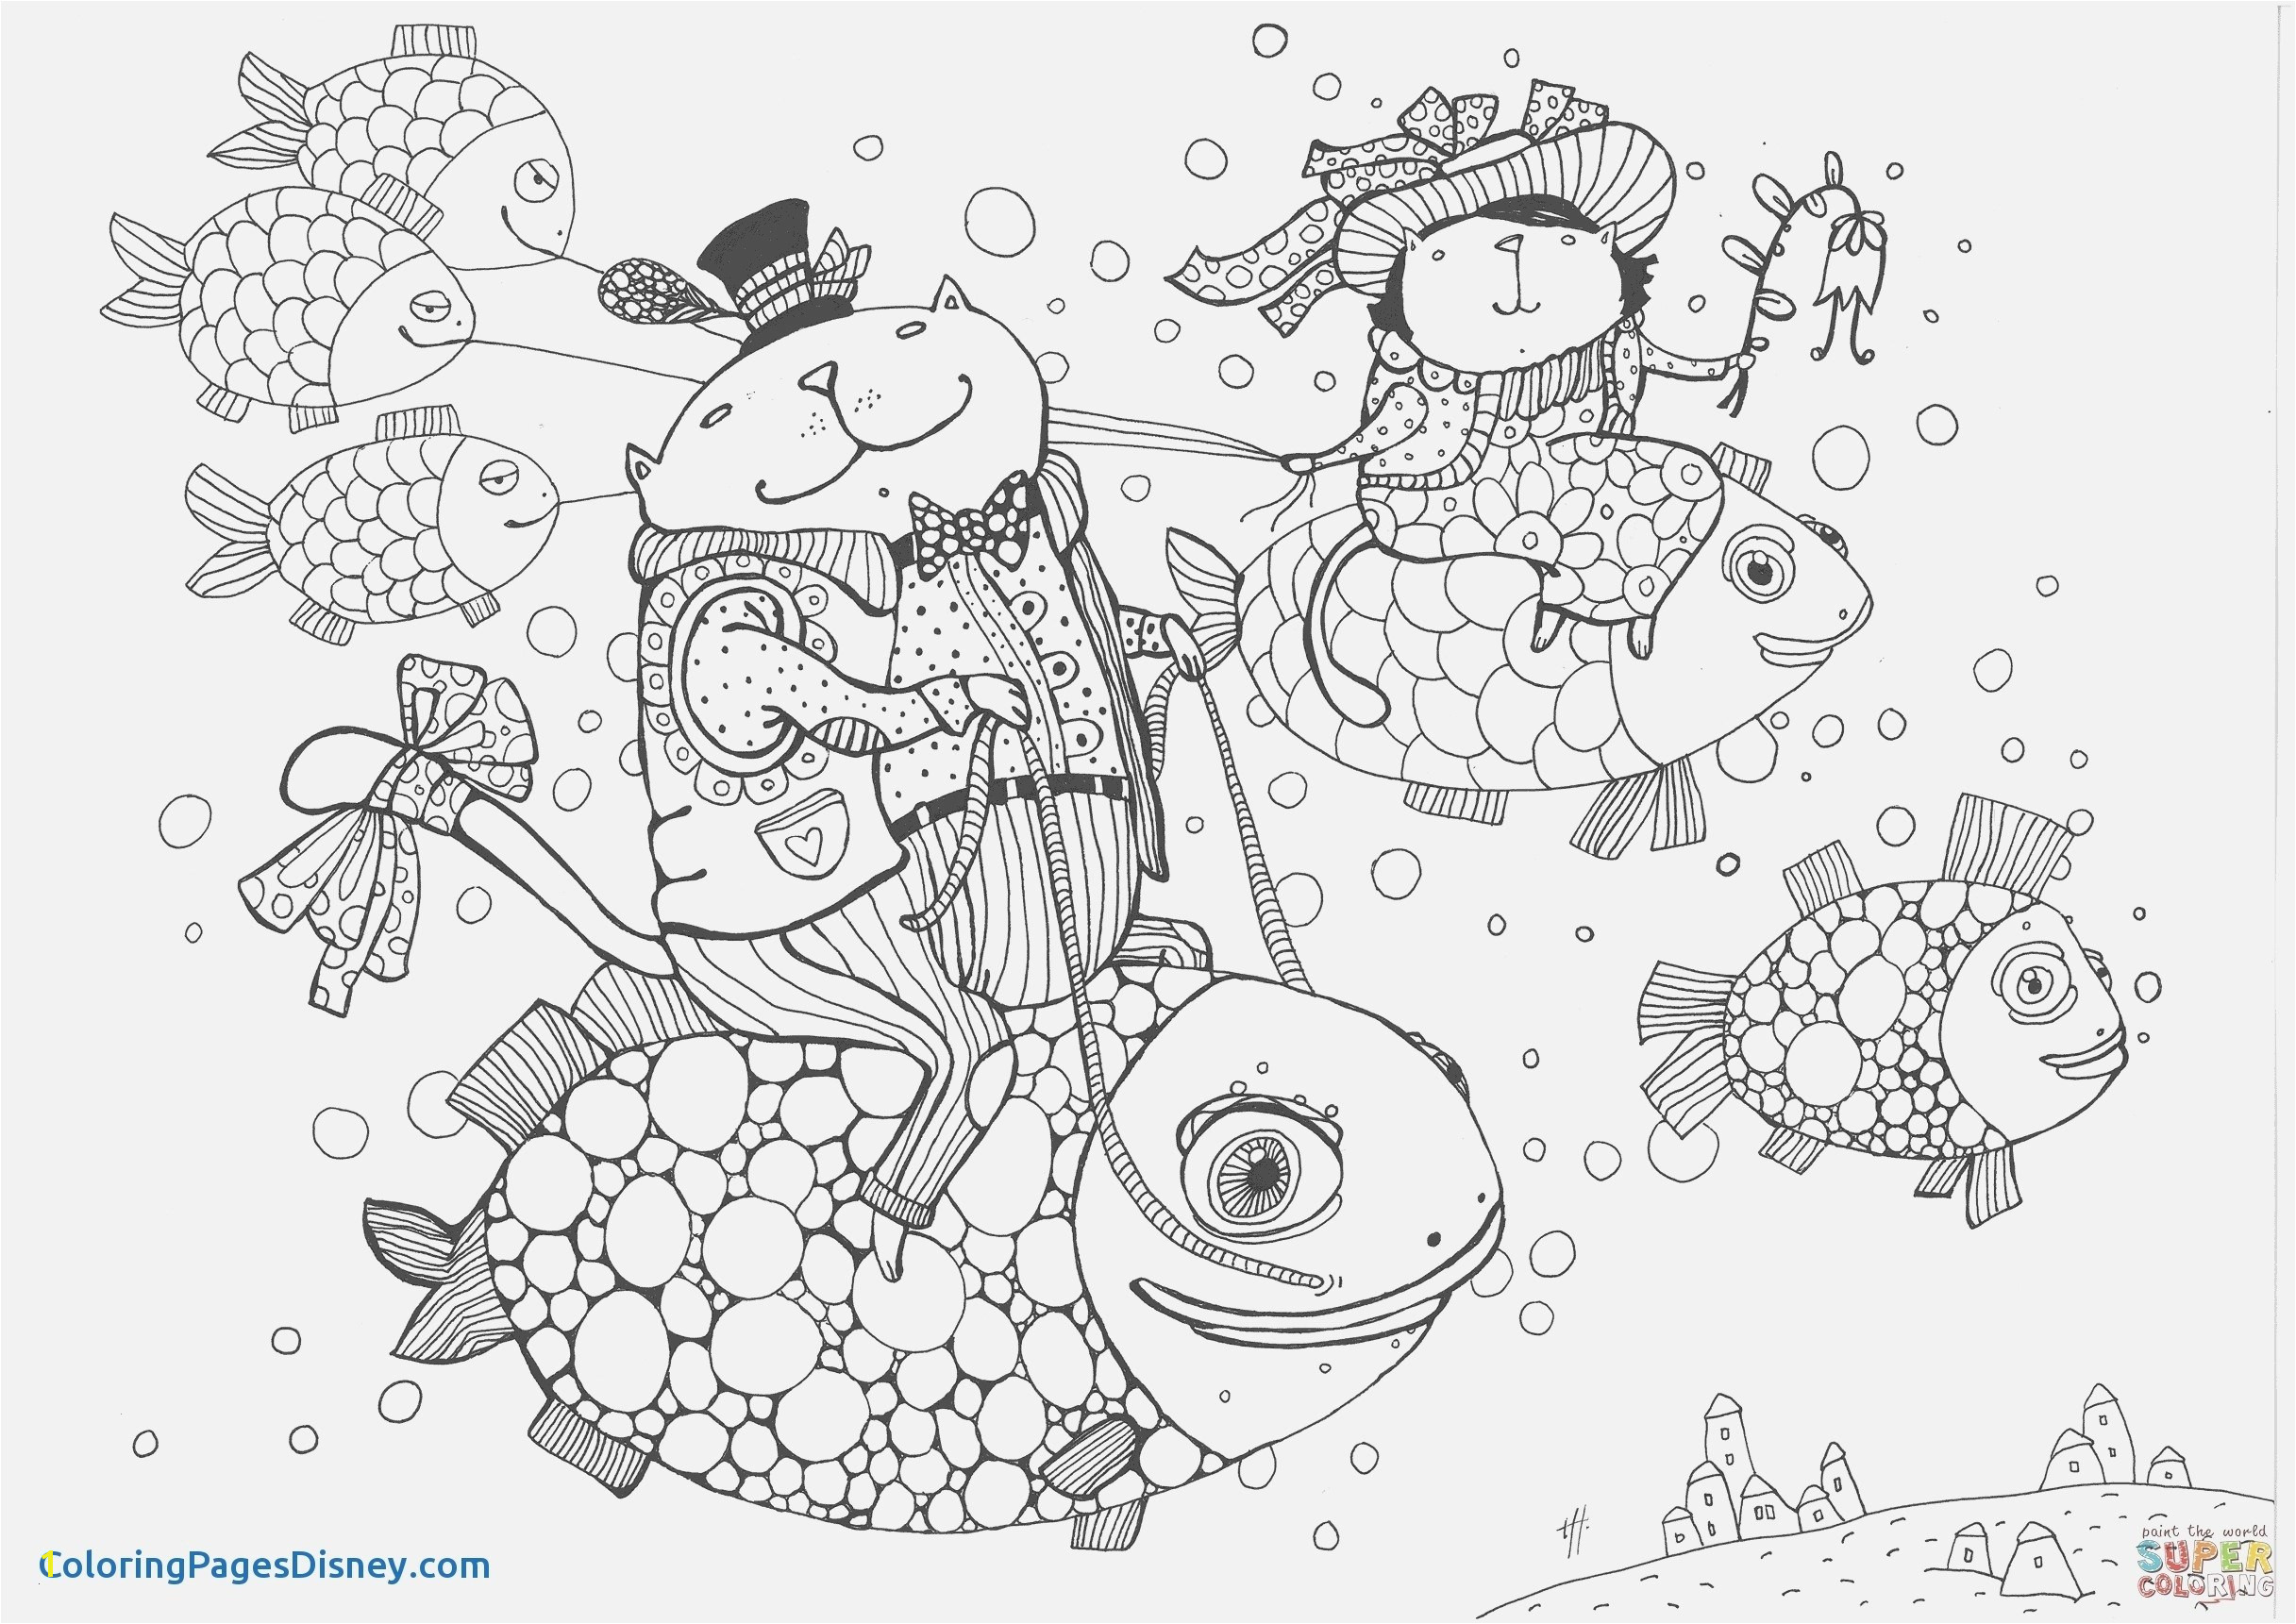 Buttercup Flower Coloring Pages 16 Luxury buttercup Flower Coloring Pages Pexels